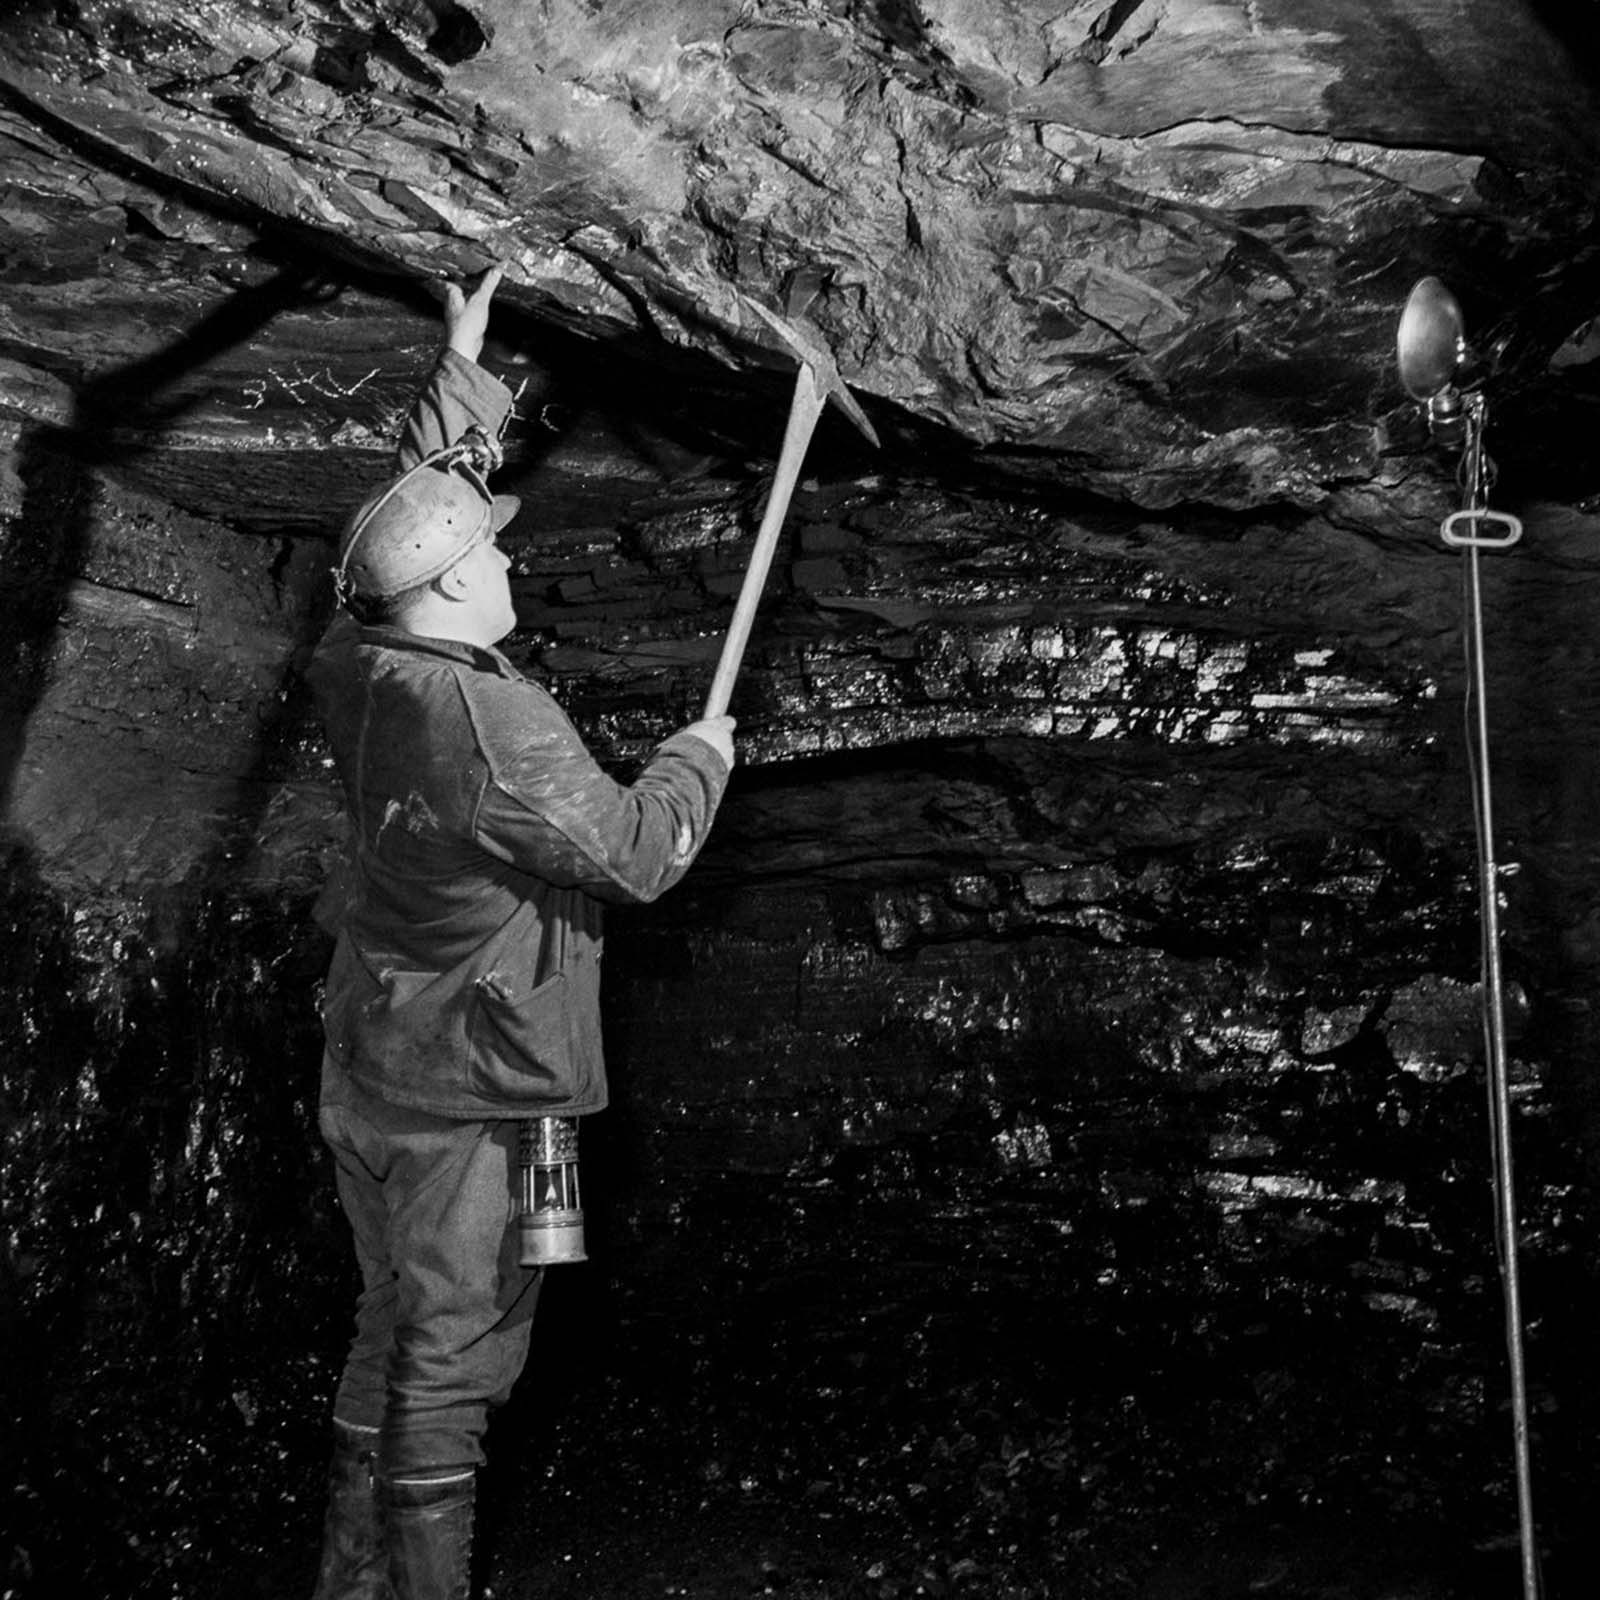 The dangerous lives of Pennsylvania coal miners captured in rare